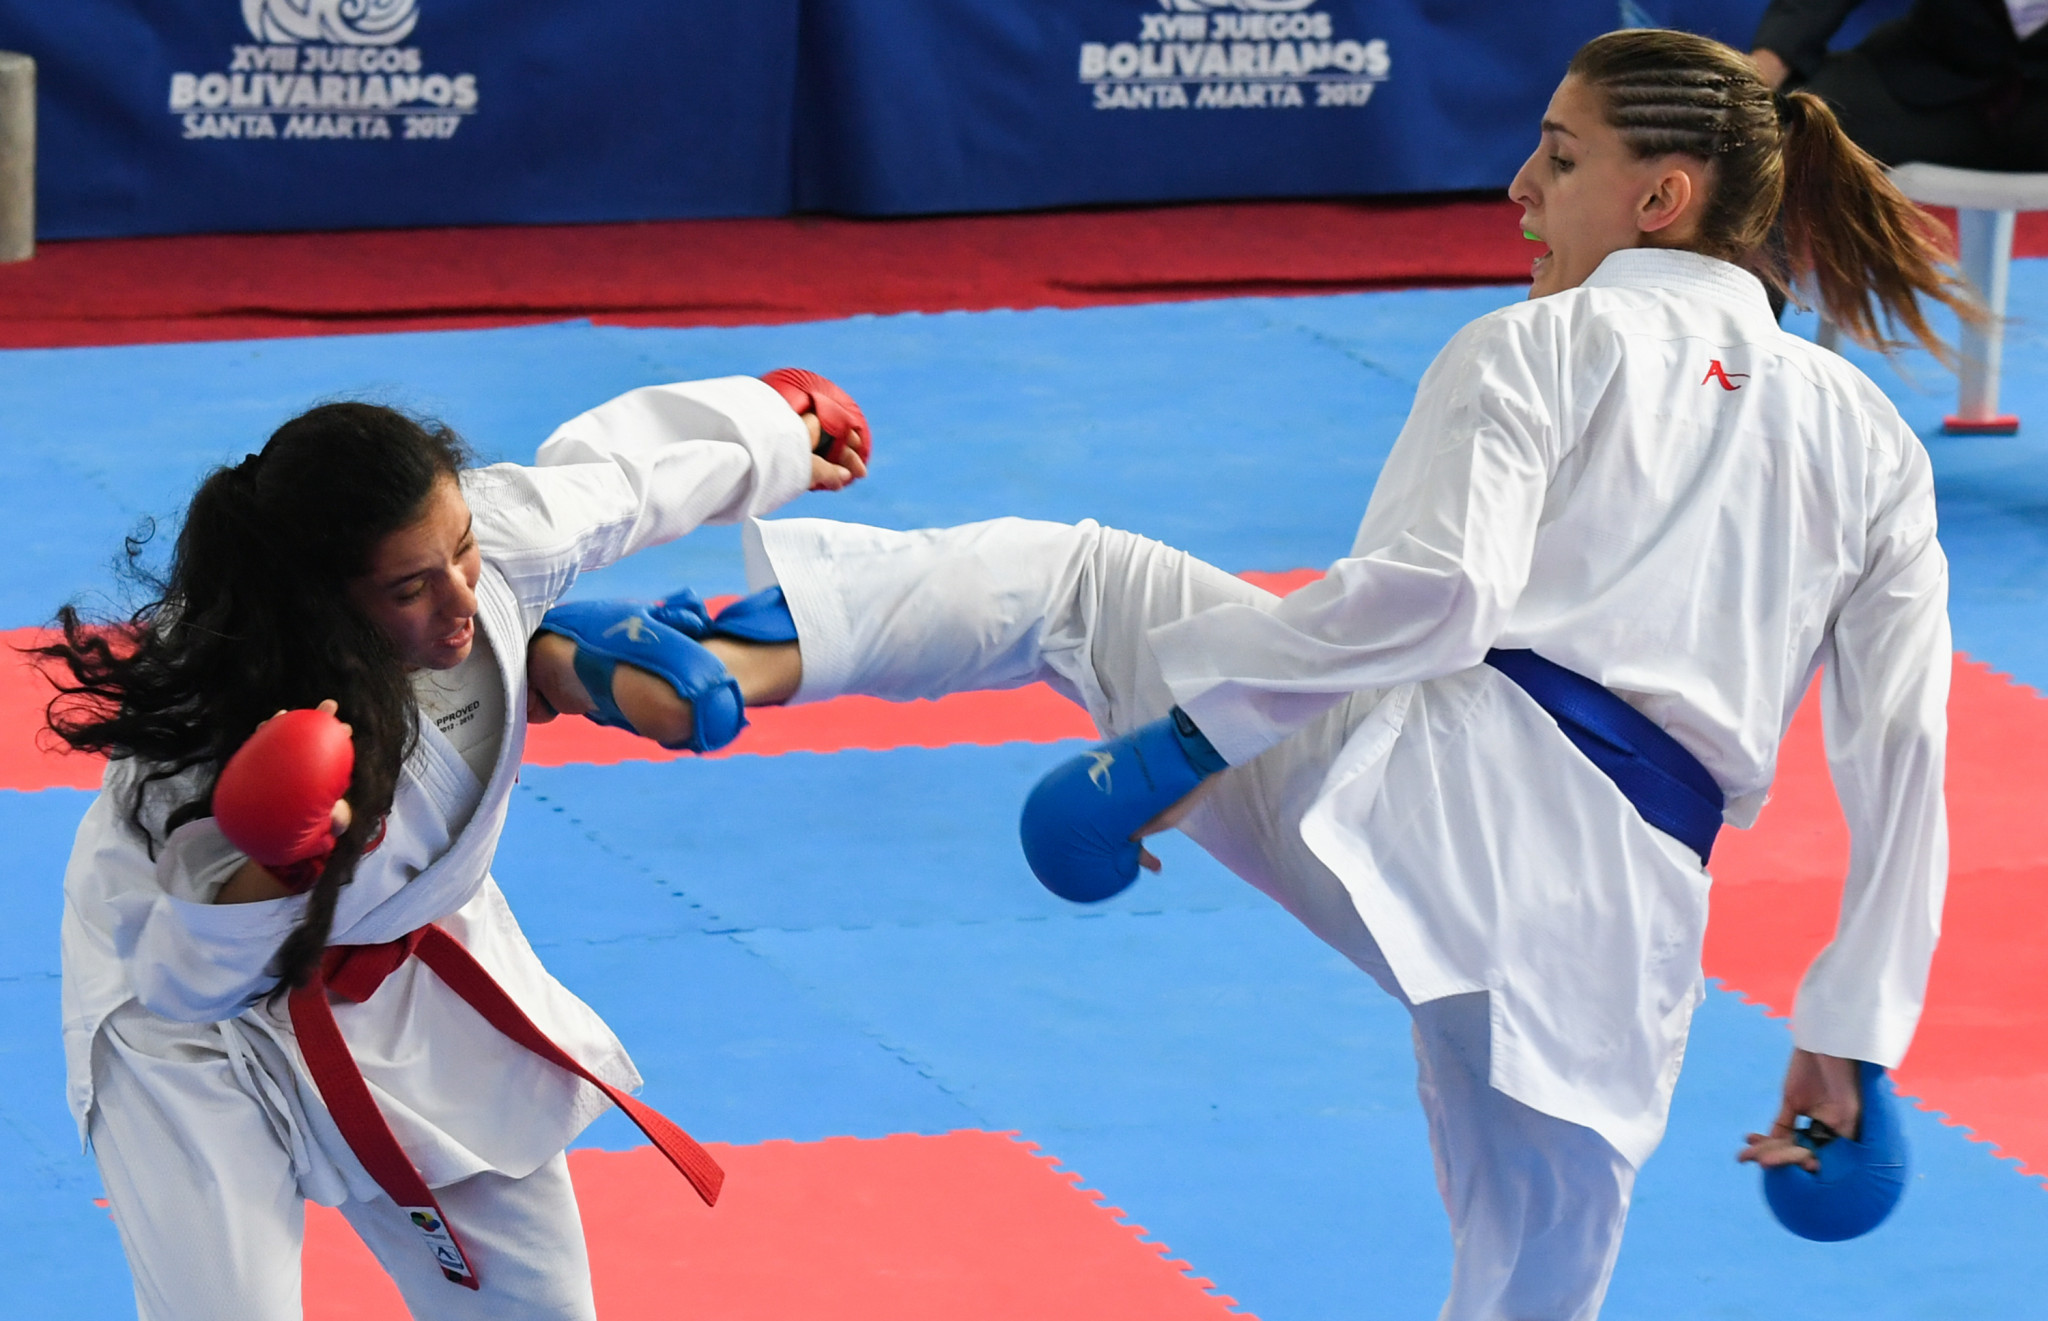 Karate is growing in the Americans prior to its Olympic debut at Tokyo 2020 ©Getty Images